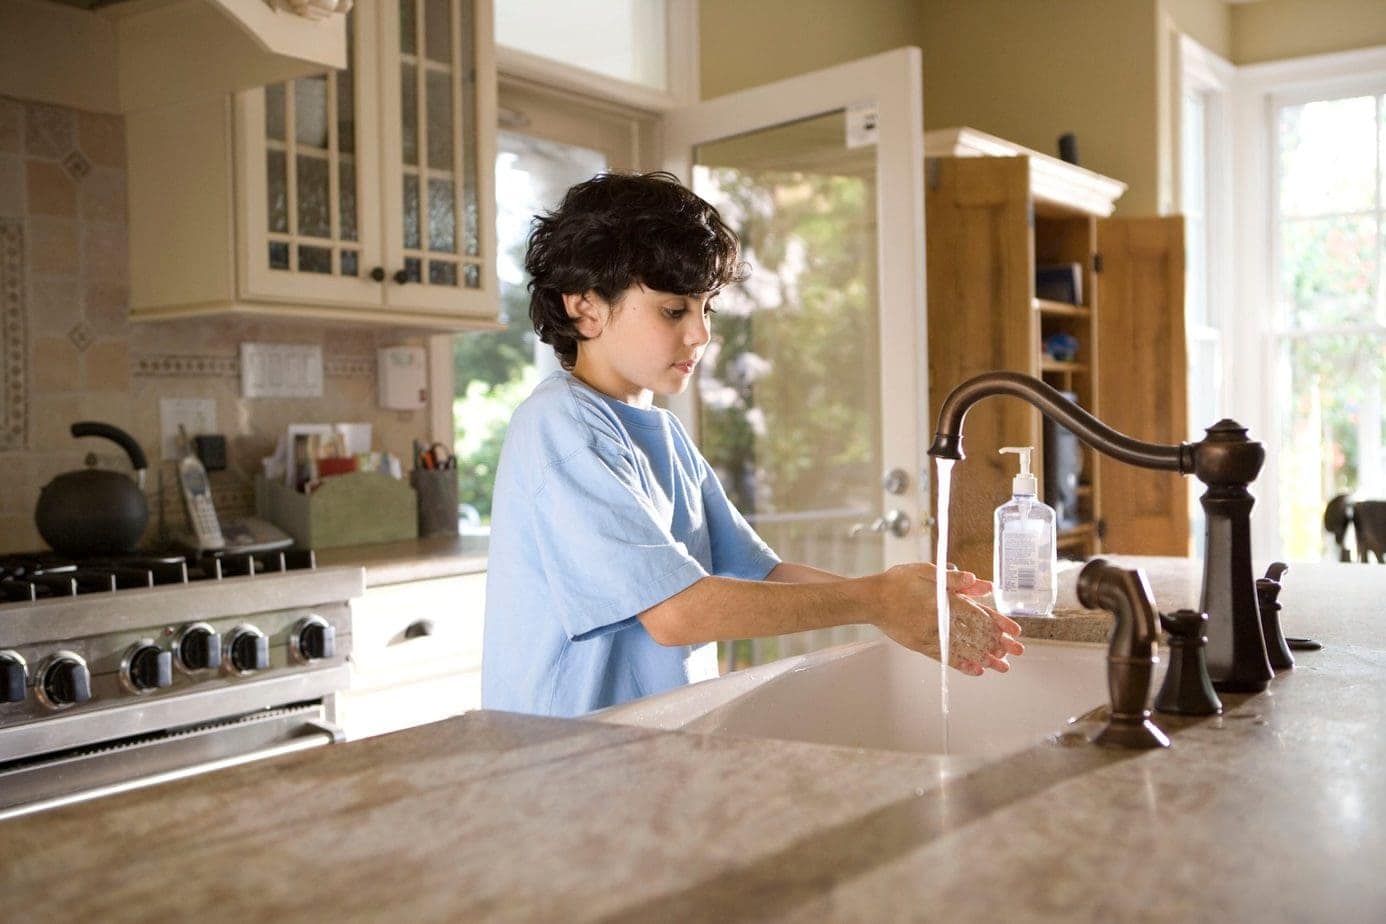 Household chores, or how to teach your child to clean up after himself?